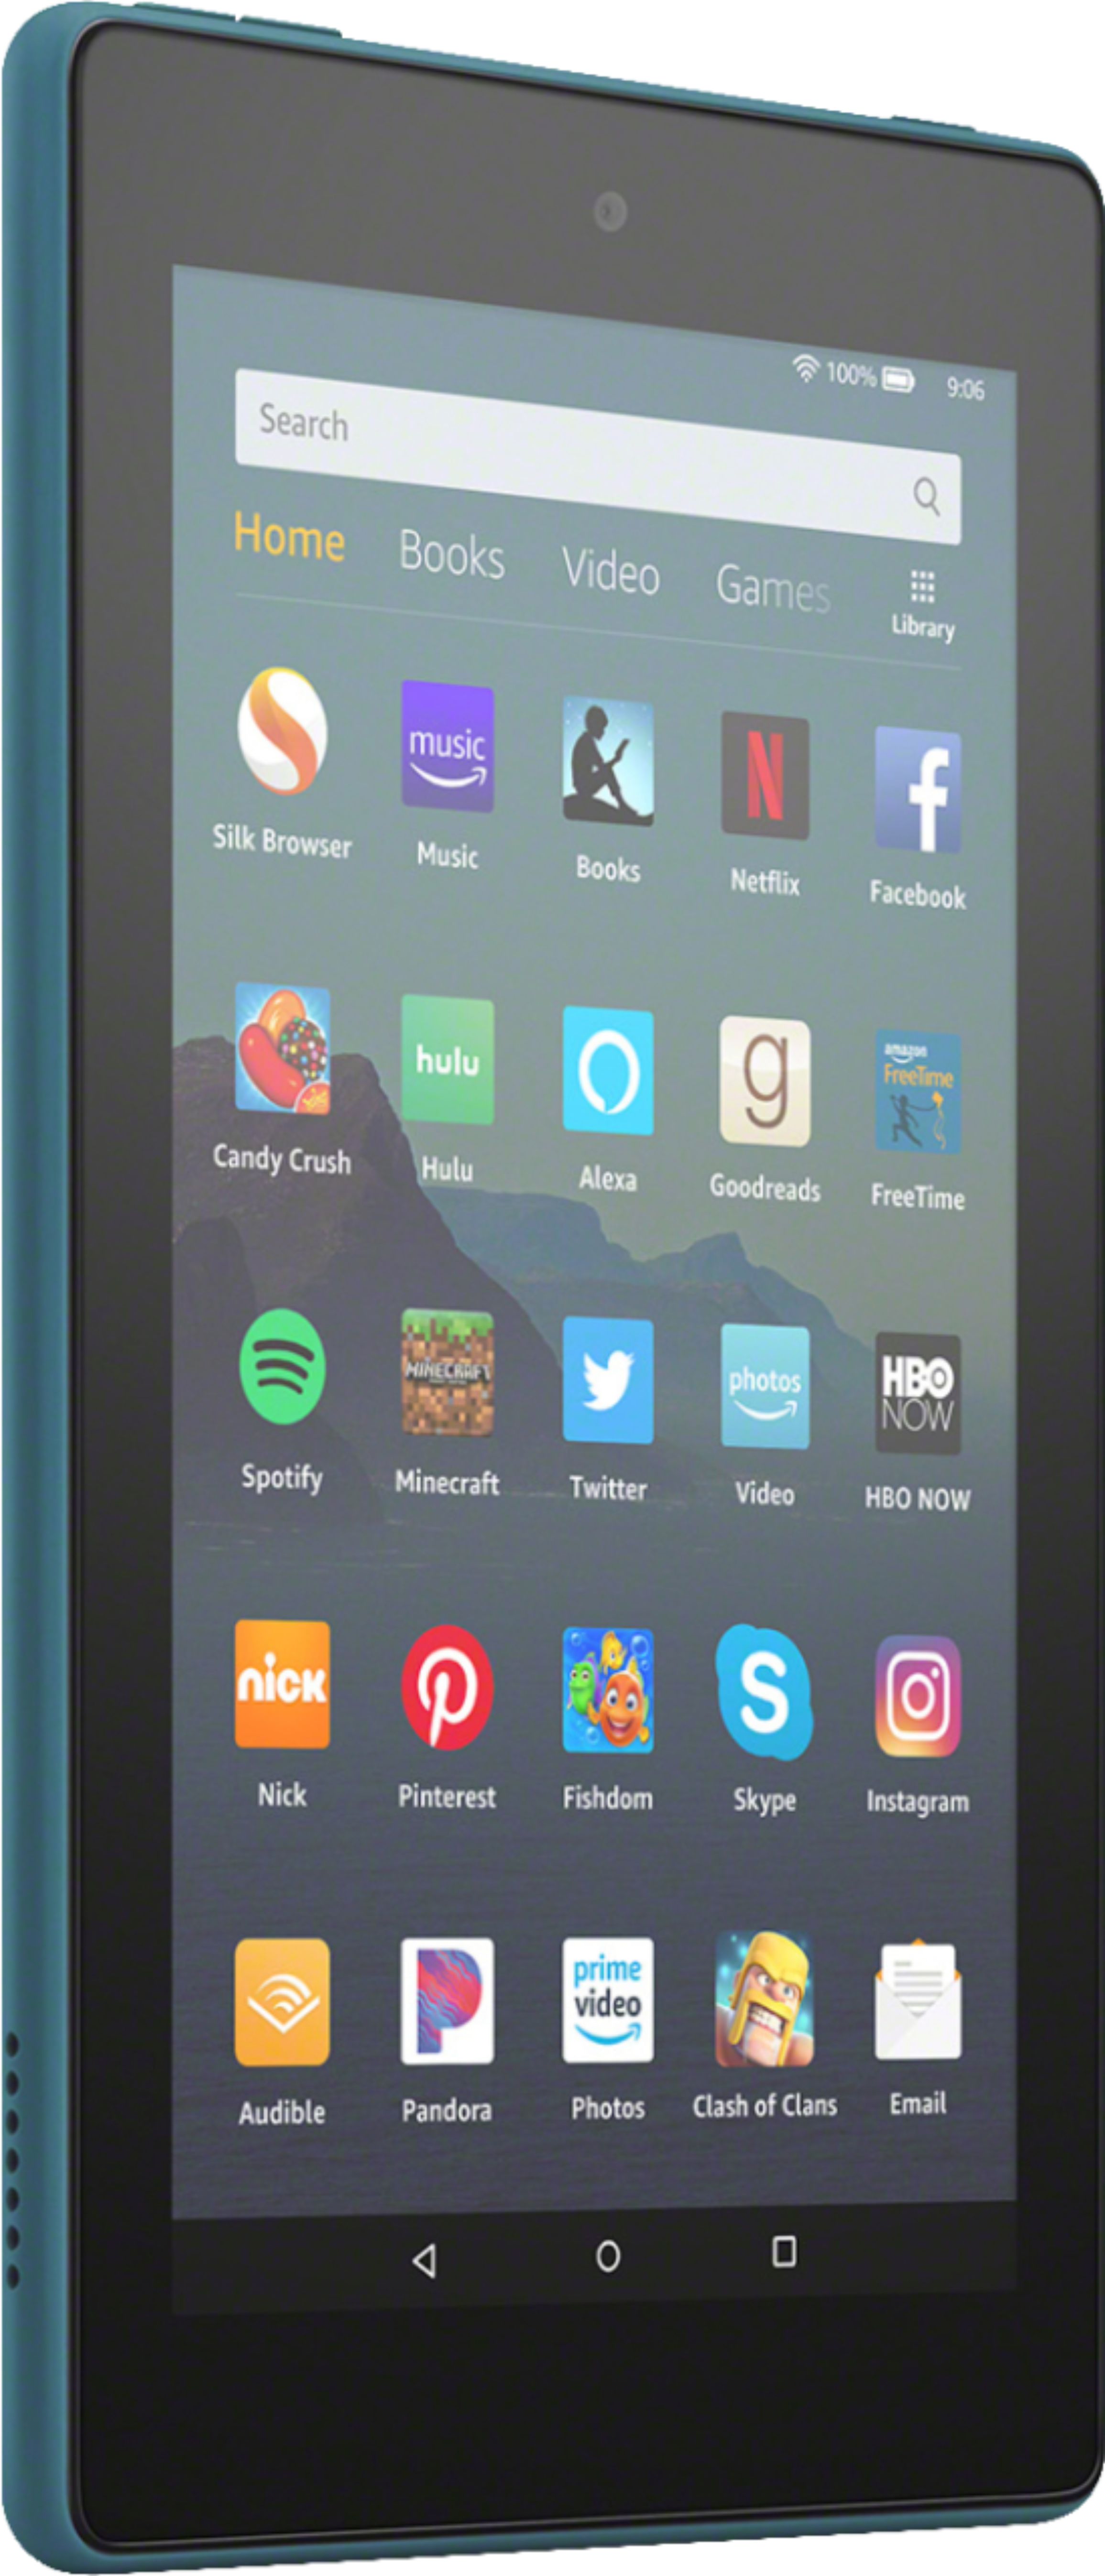 Angle View: Amazon - Fire 7 Tablet (7" display, 16 GB) - Twilight Blue